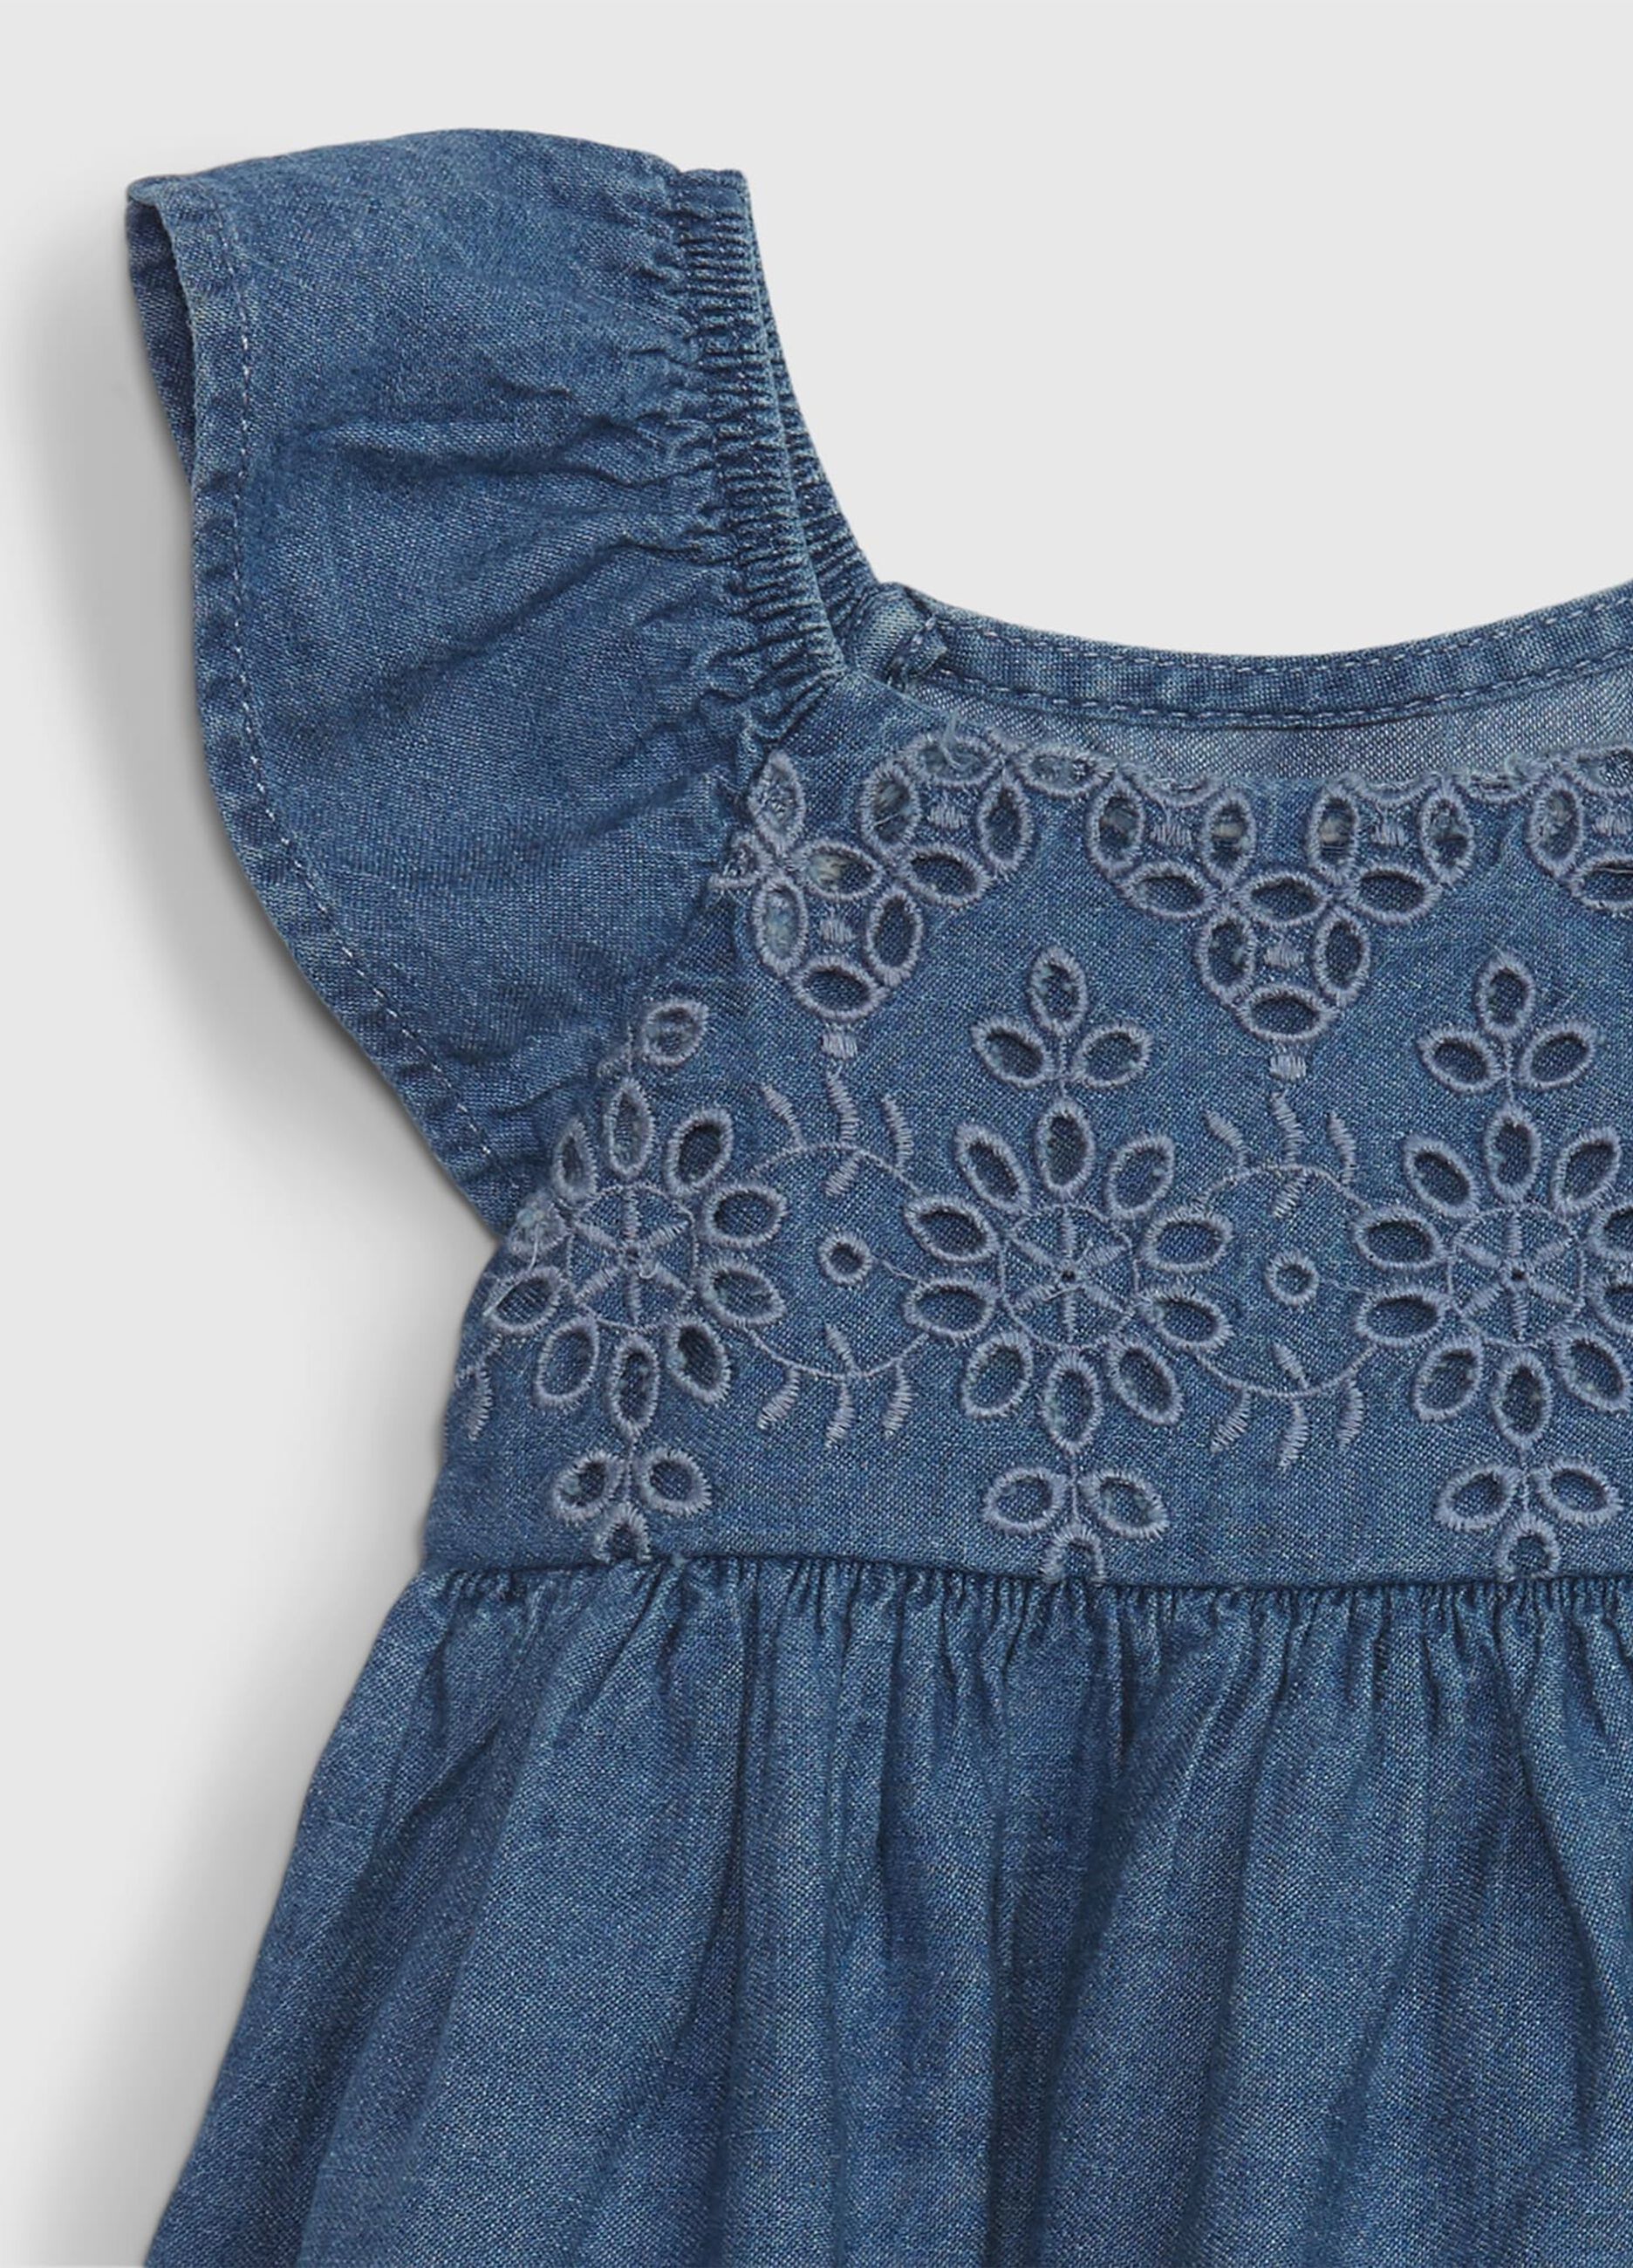 Denim dress with broderie anglaise details